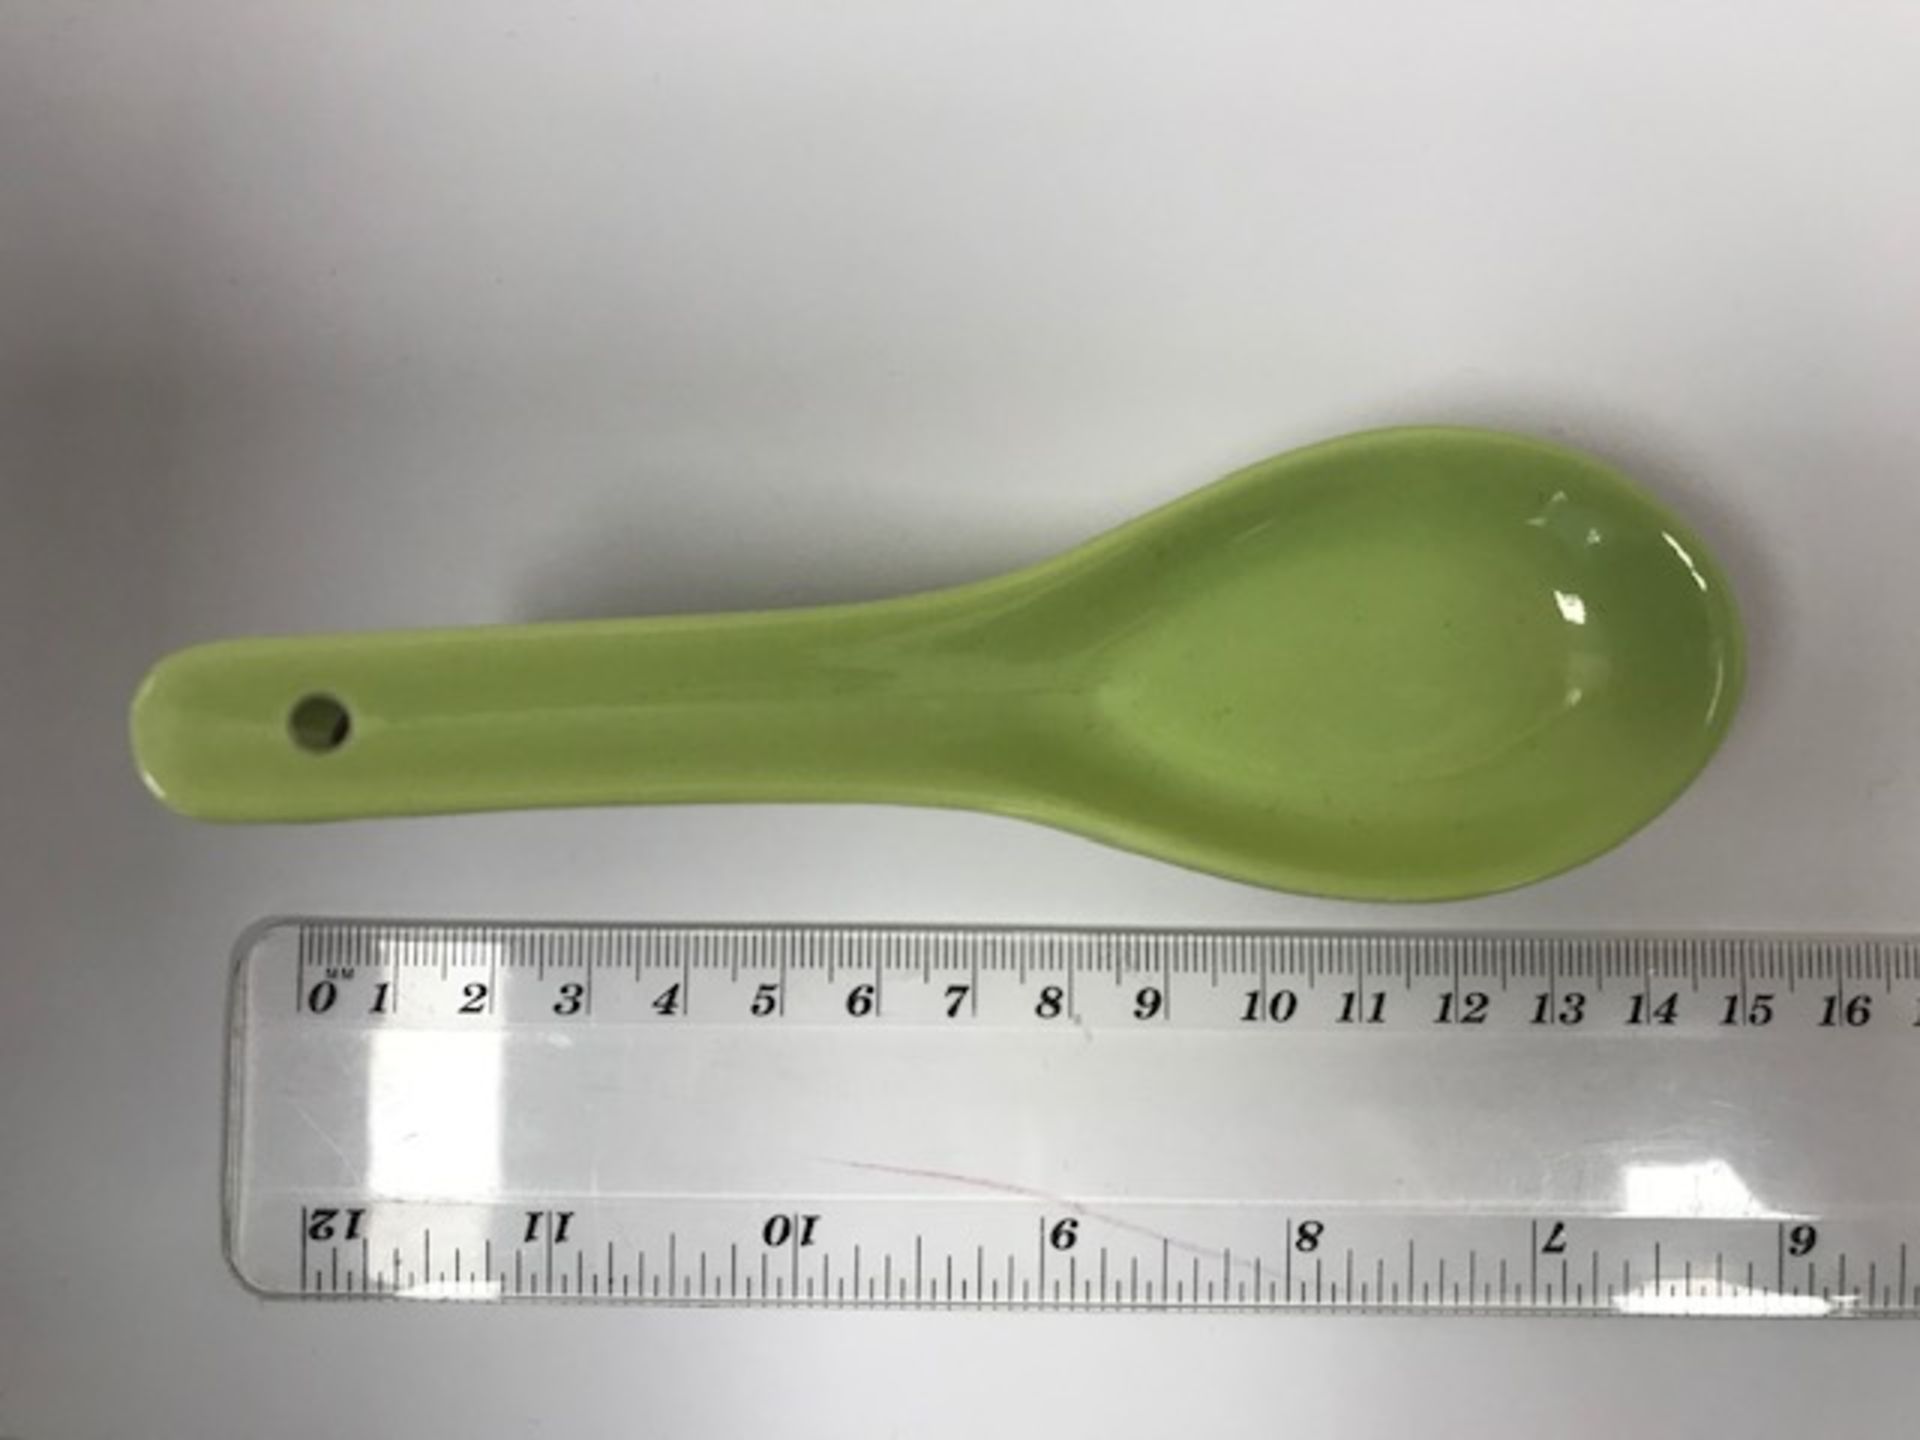 100 x pale green chinese spoon - Image 2 of 4